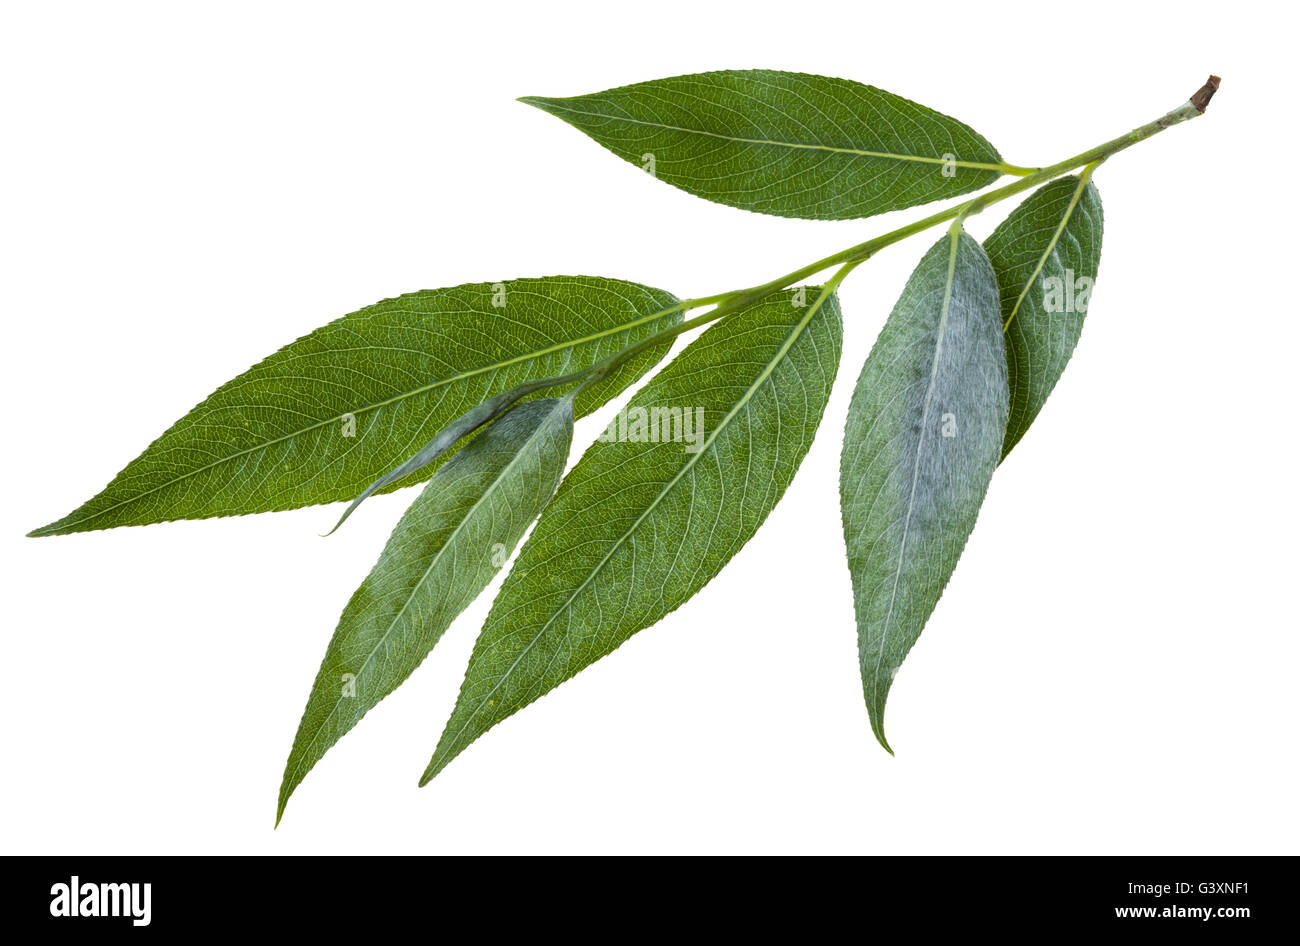 twig with green leaves of willow (Salix acutifolia, sharp-leaf willow) isolated on white background Stock Photo